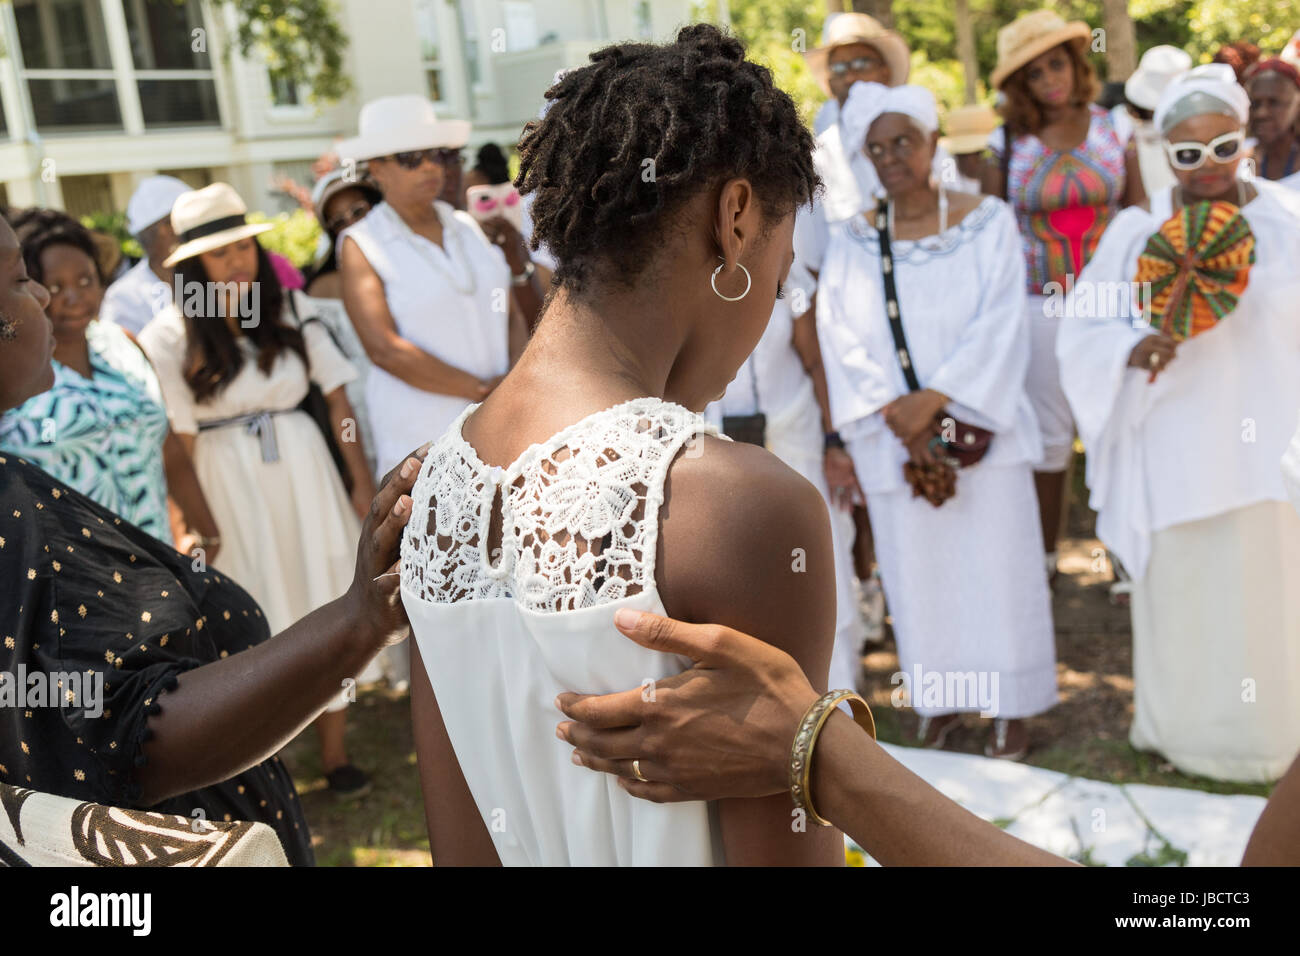 Descendants of enslaved Africans brought to Charleston in the Middle Passage hold a prayer service during a remembrance ceremony at Fort Moutrie National Monument June 10, 2017 in Sullivan's Island, South Carolina. The Middle Passage refers to the triangular trade in which millions of Africans were shipped to the New World as part of the Atlantic slave trade. An estimated 15% of the Africans died at sea and considerably more in the process of capturing and transporting. The total number of African deaths directly attributable to the Middle Passage voyage is estimated at two million Africans. Stock Photo